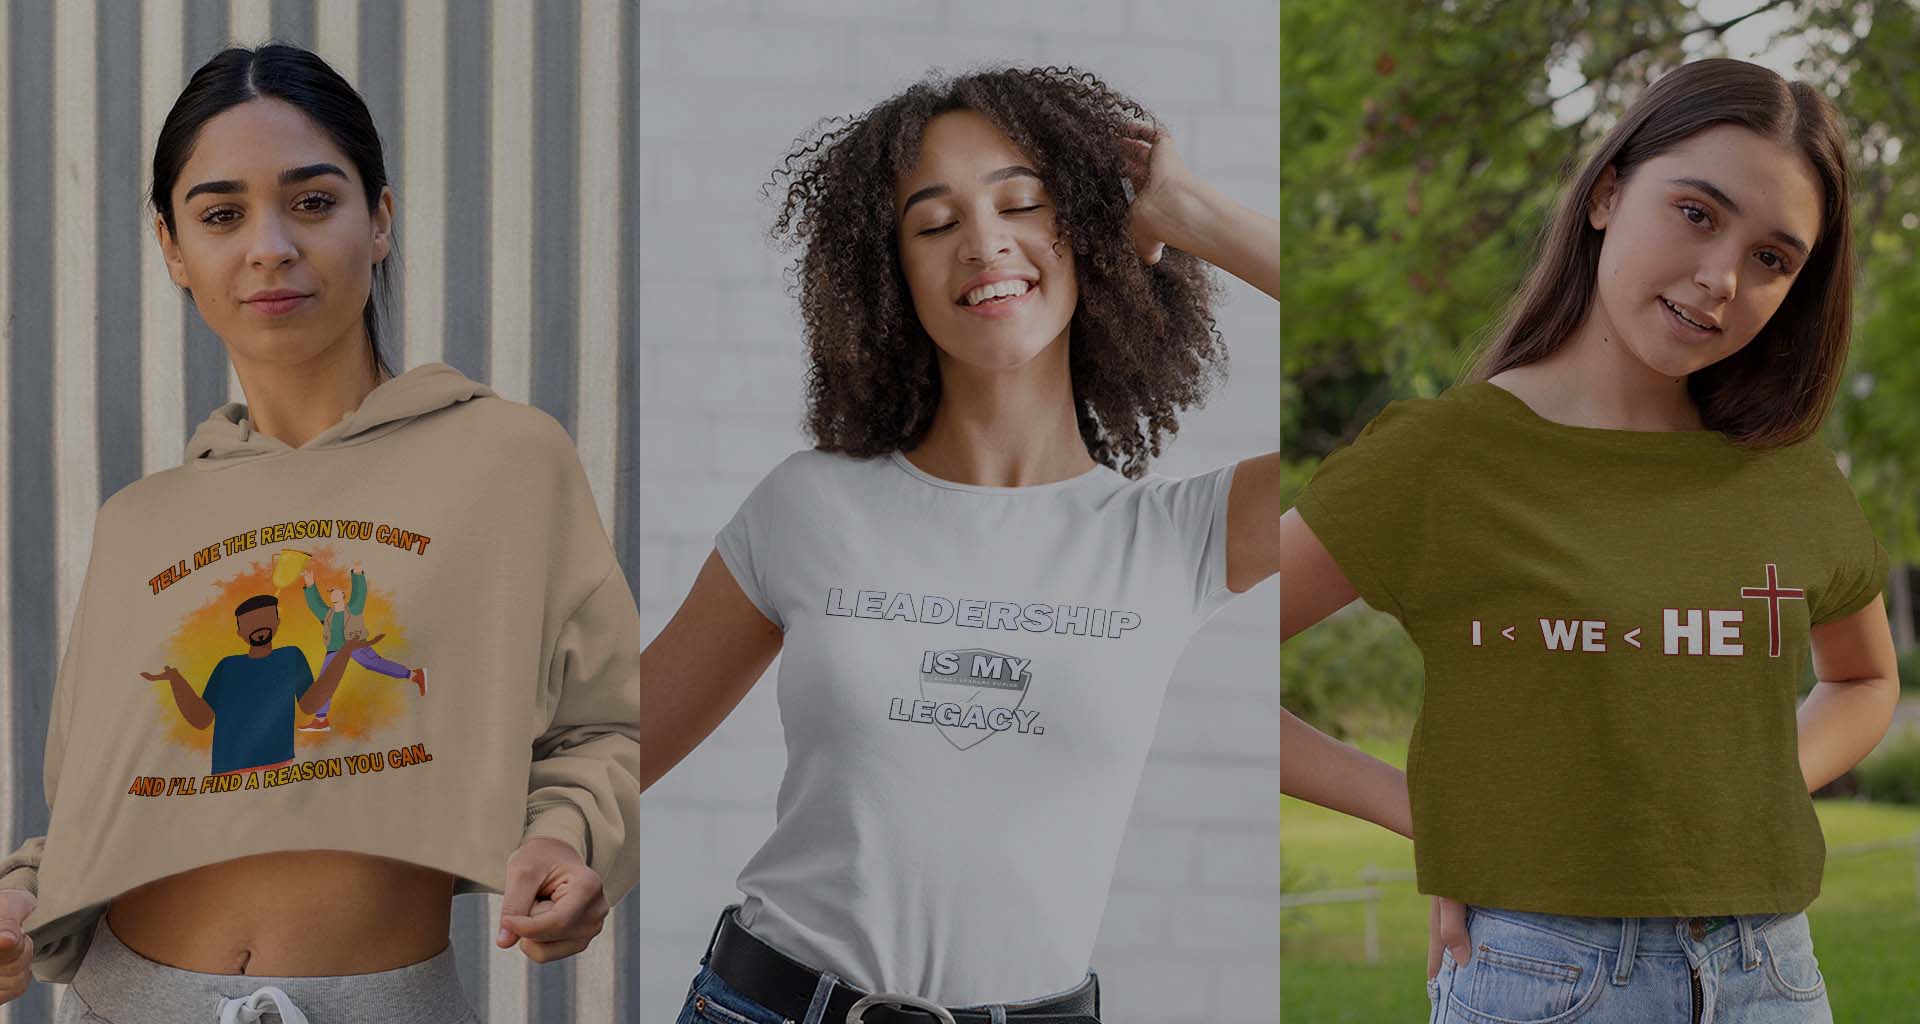 Family-Owned Business Legacy Leaders Launches Inspirational Apparel Collection for the Entire Family